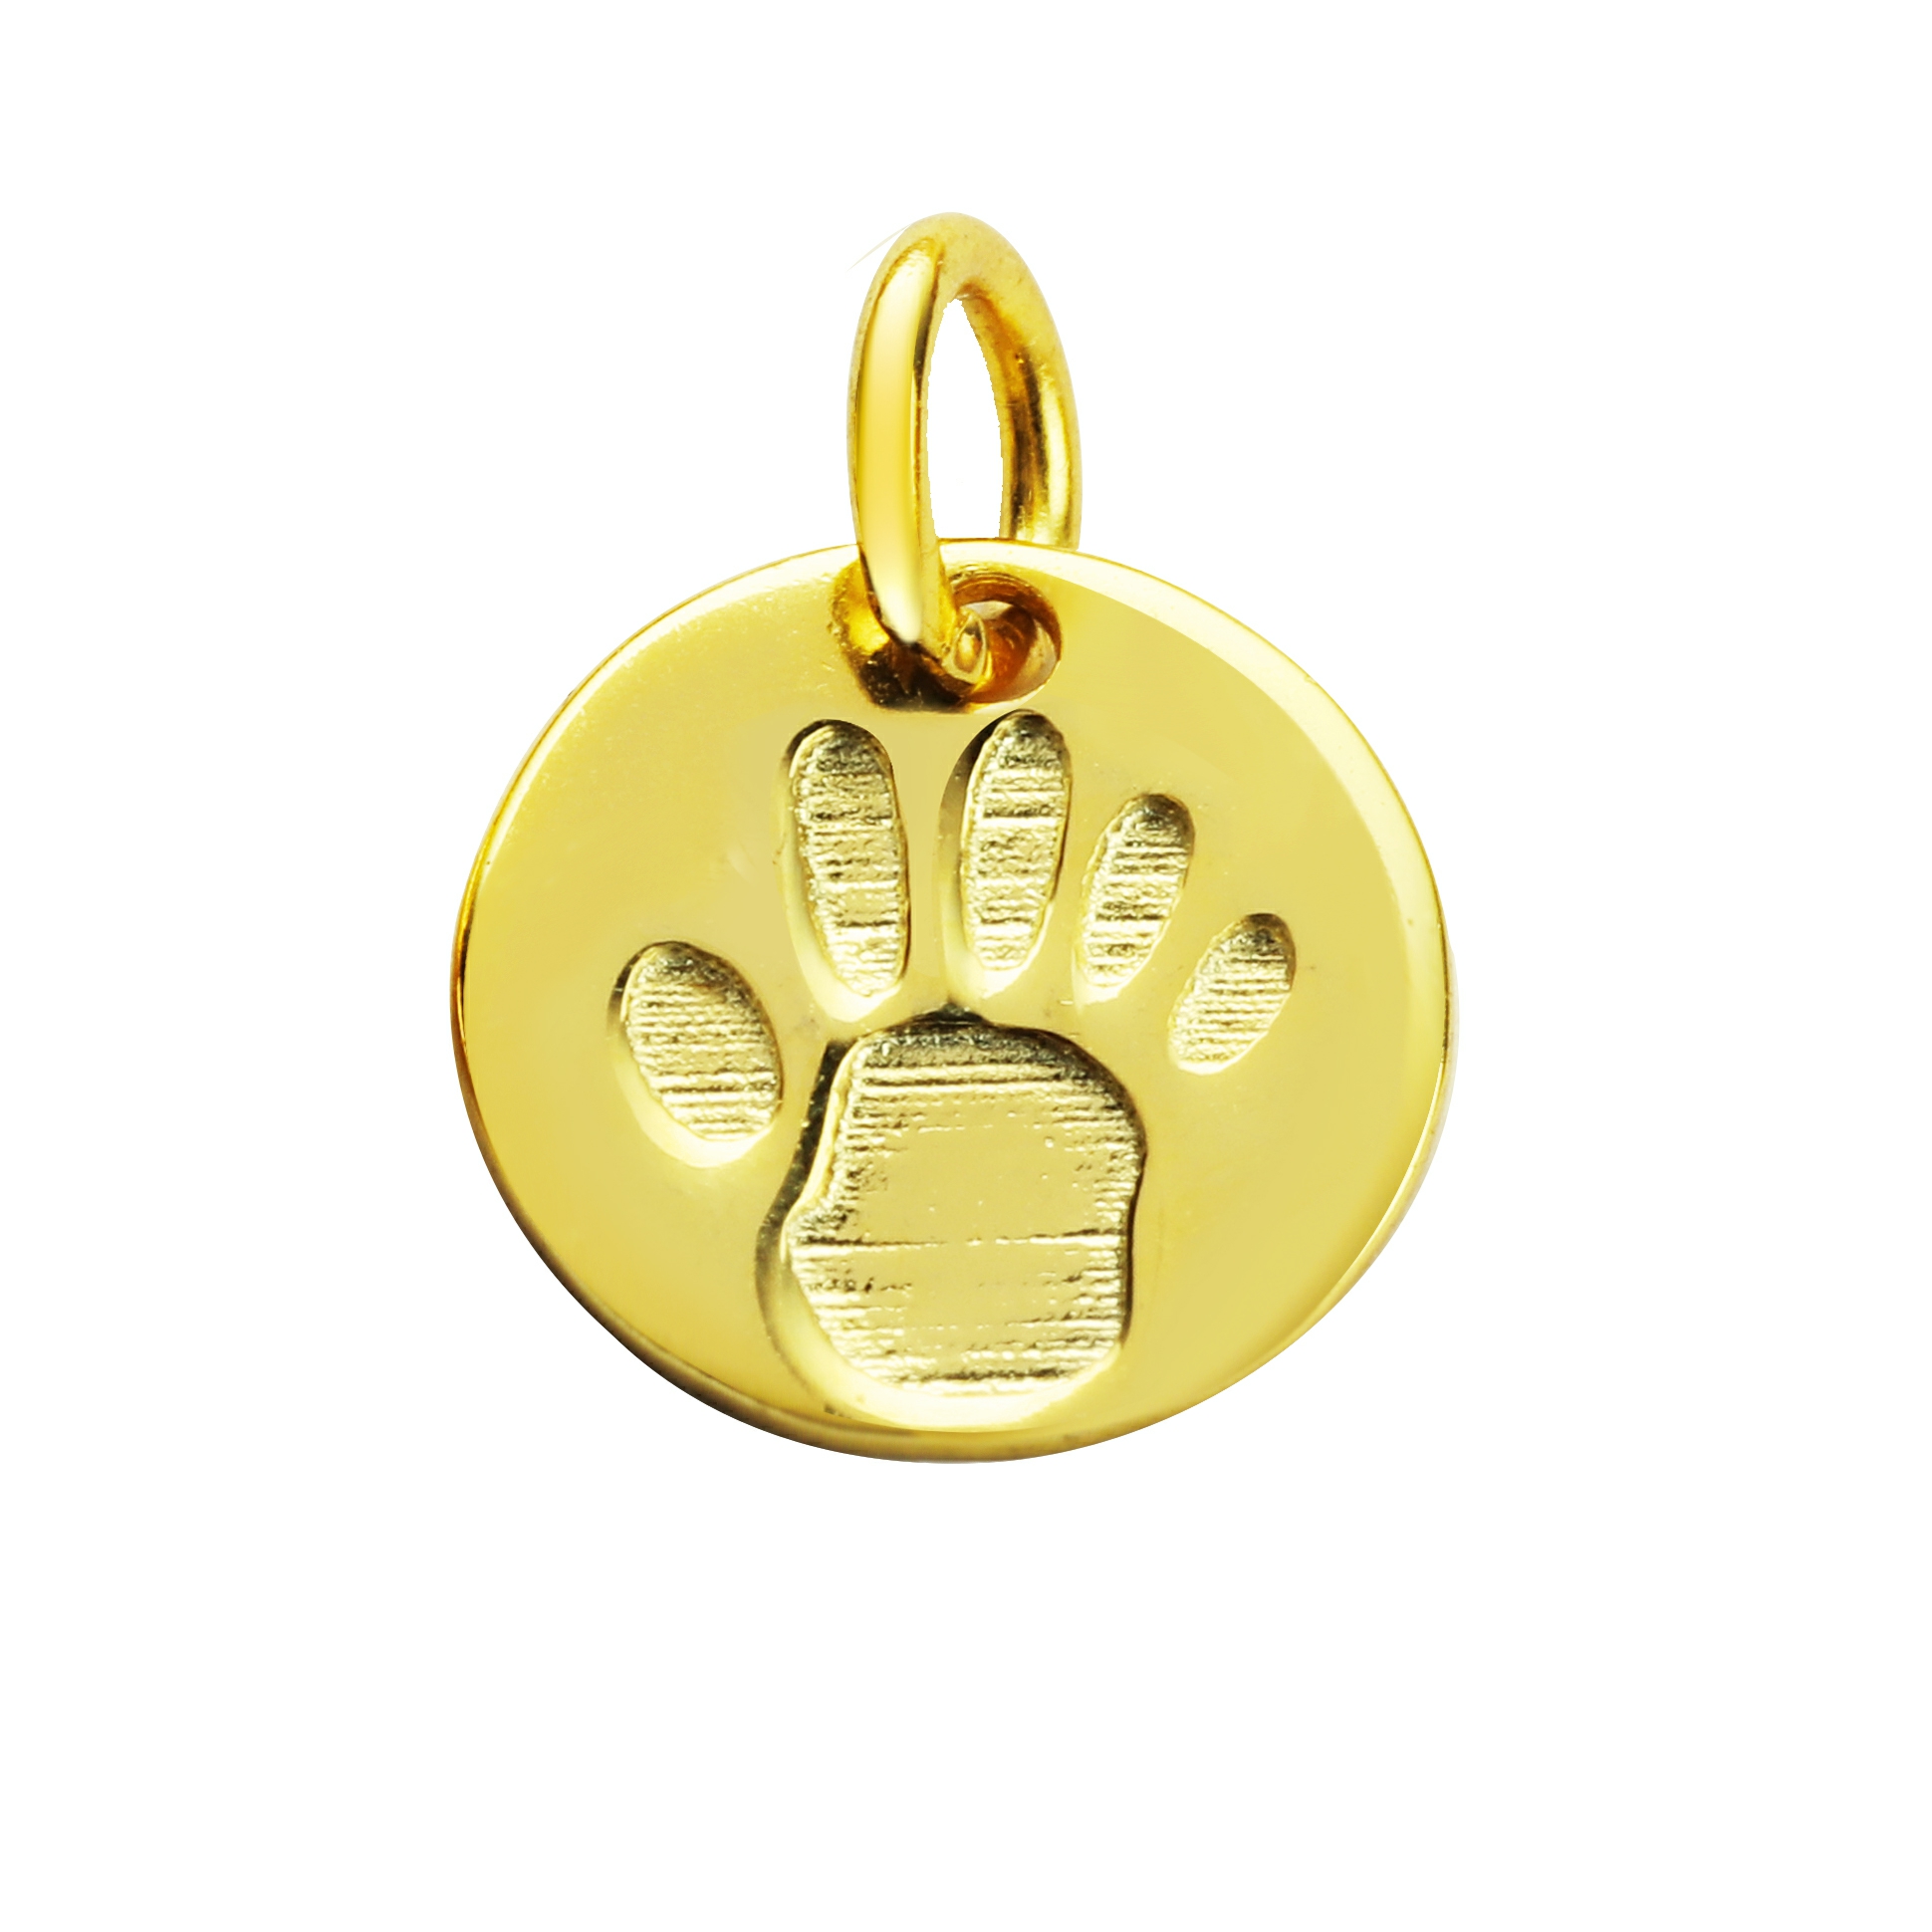 7MM Round Baby Handprint Footprint Charm,Keepsake Solid 925 Sterling Silver Gold Plated Pendant Charm,DIY Pendant Charm Supplies 1431196 - Click Image to Close